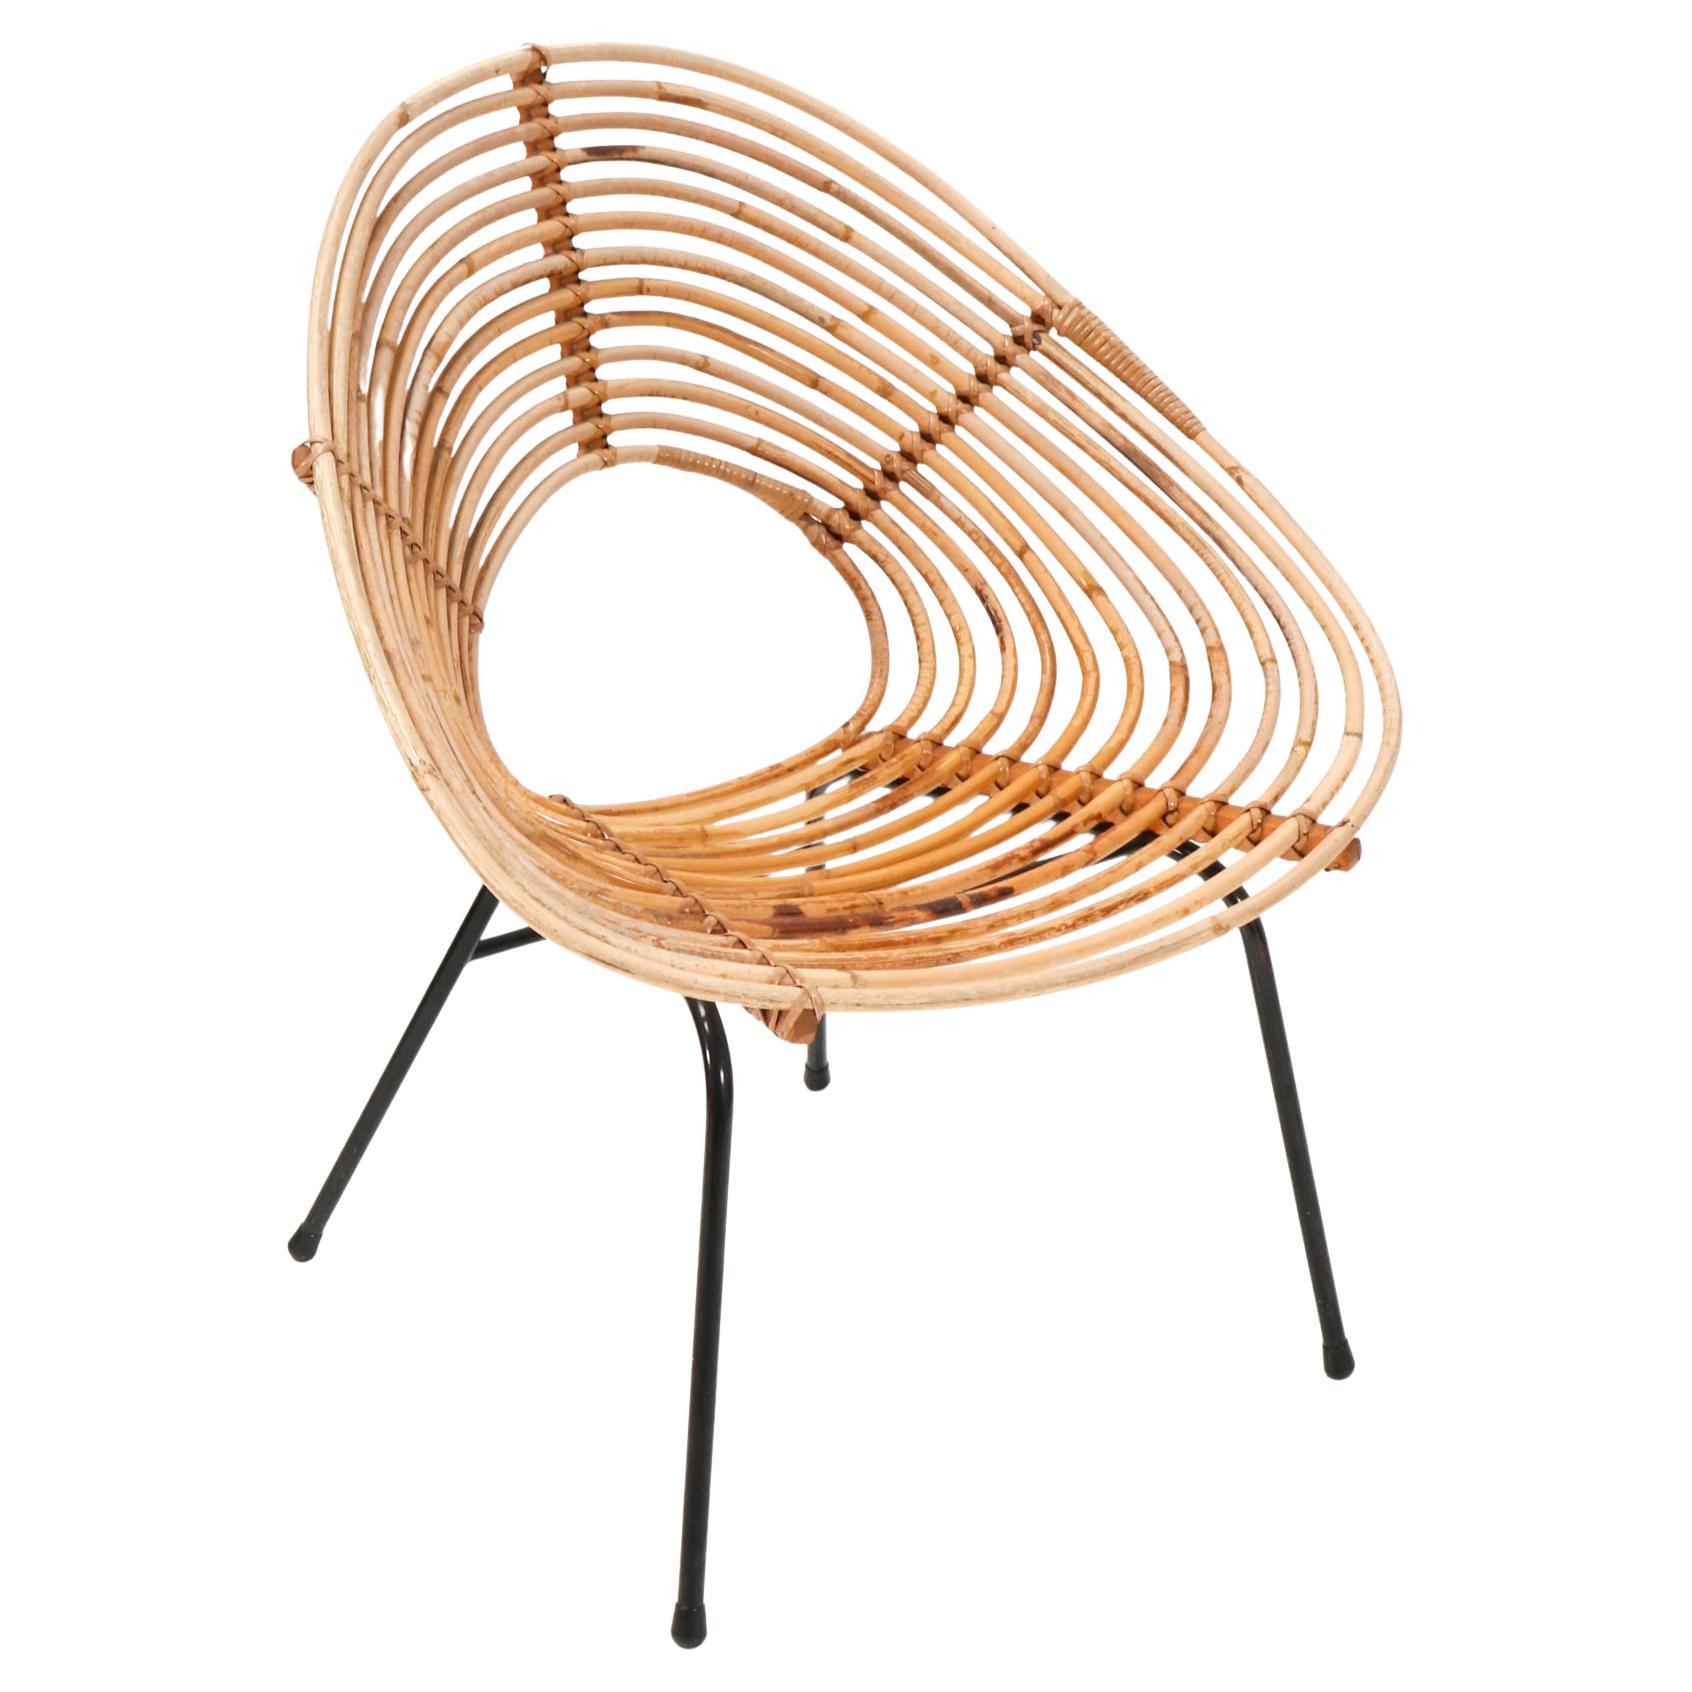 Rattan Mid-Century Modern Lounge Chair by Dirk van Sliedregt for Rohe, 1950s For Sale